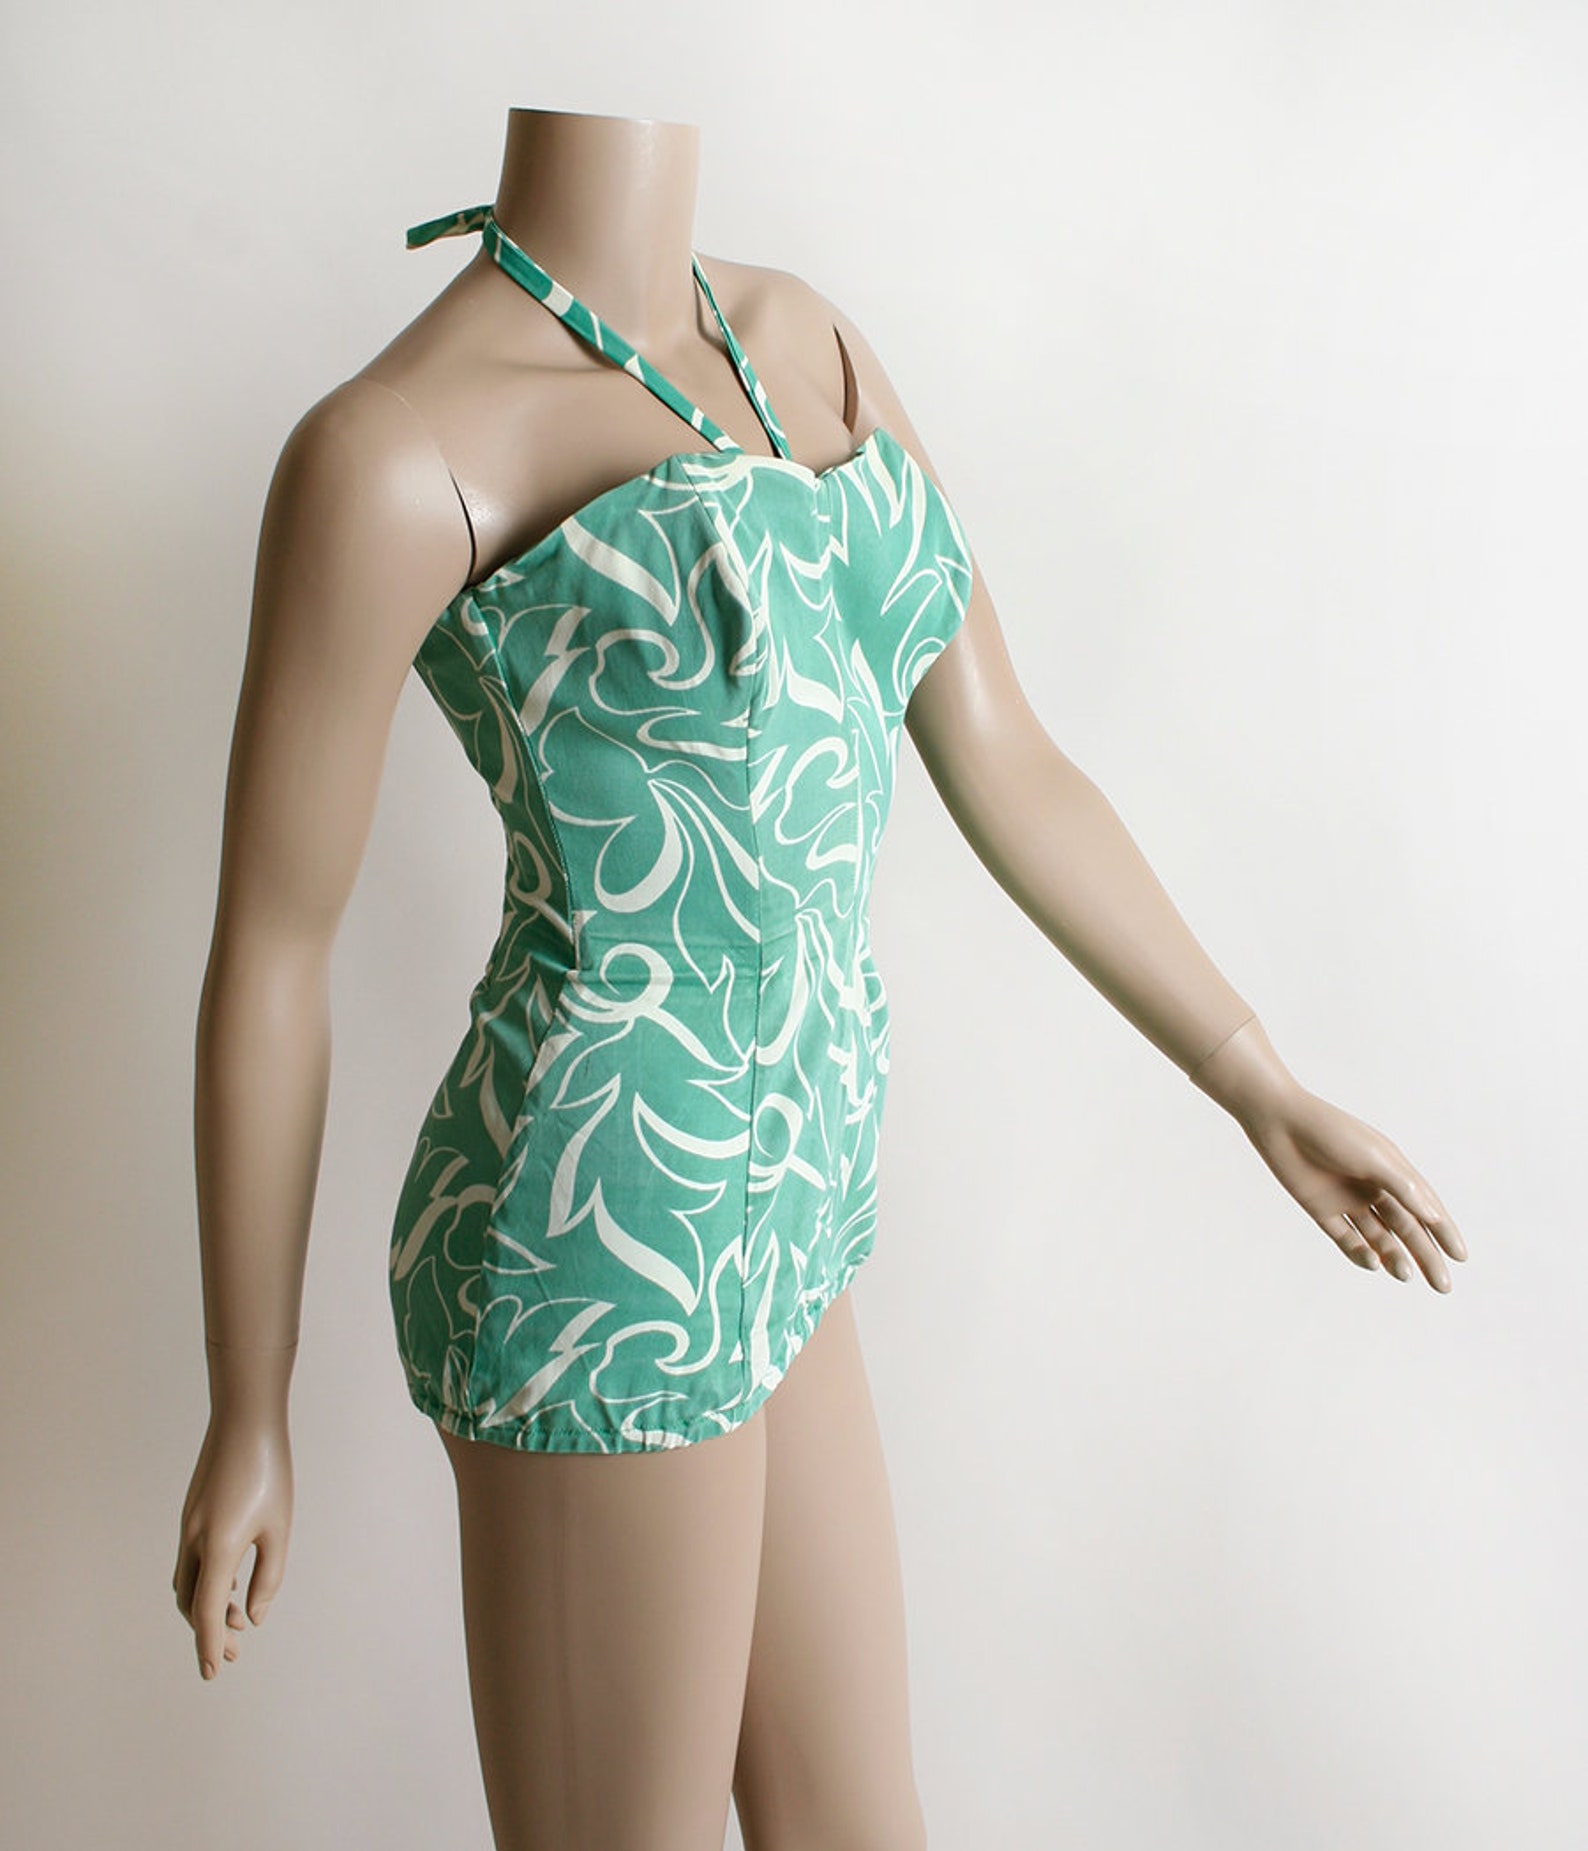 Vintage 1940s Bathing Suit 1950s Pin-up Mint Jade Green & - Etsy